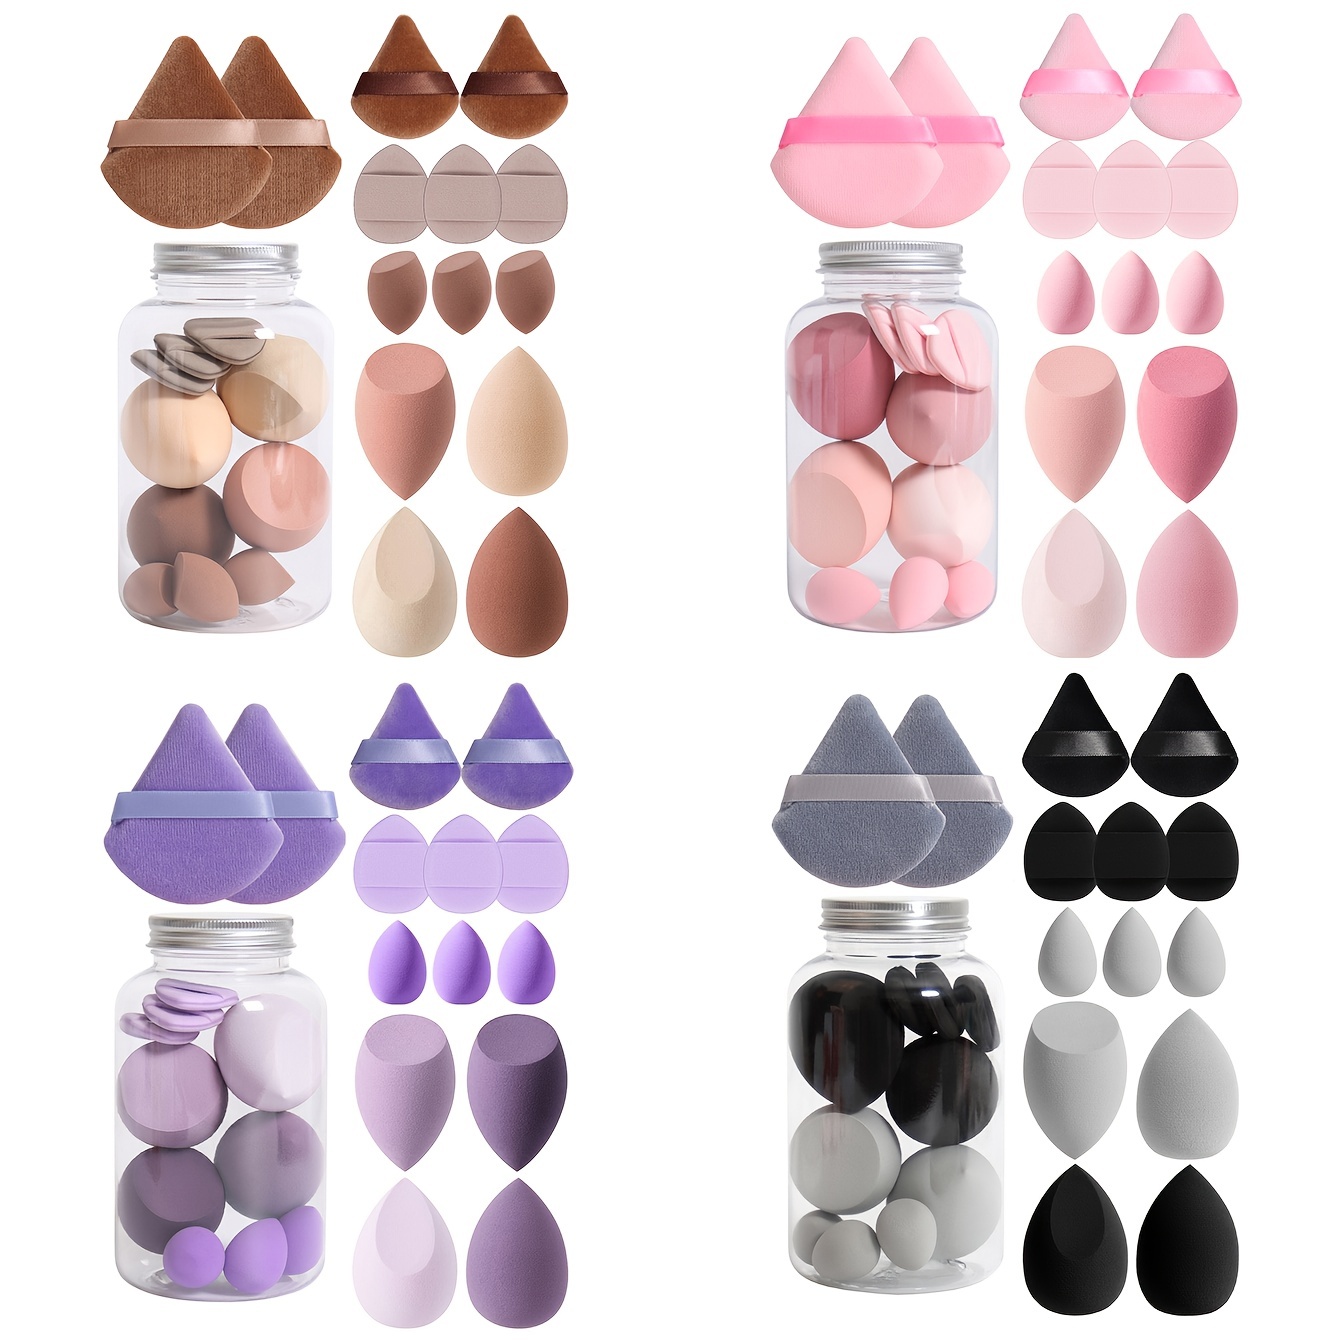 

14pc Makeup Sponge Set With Storage Jar, Velvet Beauty Blenders, Latex-free, Makeup Sponge Finger Puff, Dual-use Wet & Dry Foundation Cosmetic Puffs, For All Skin Types